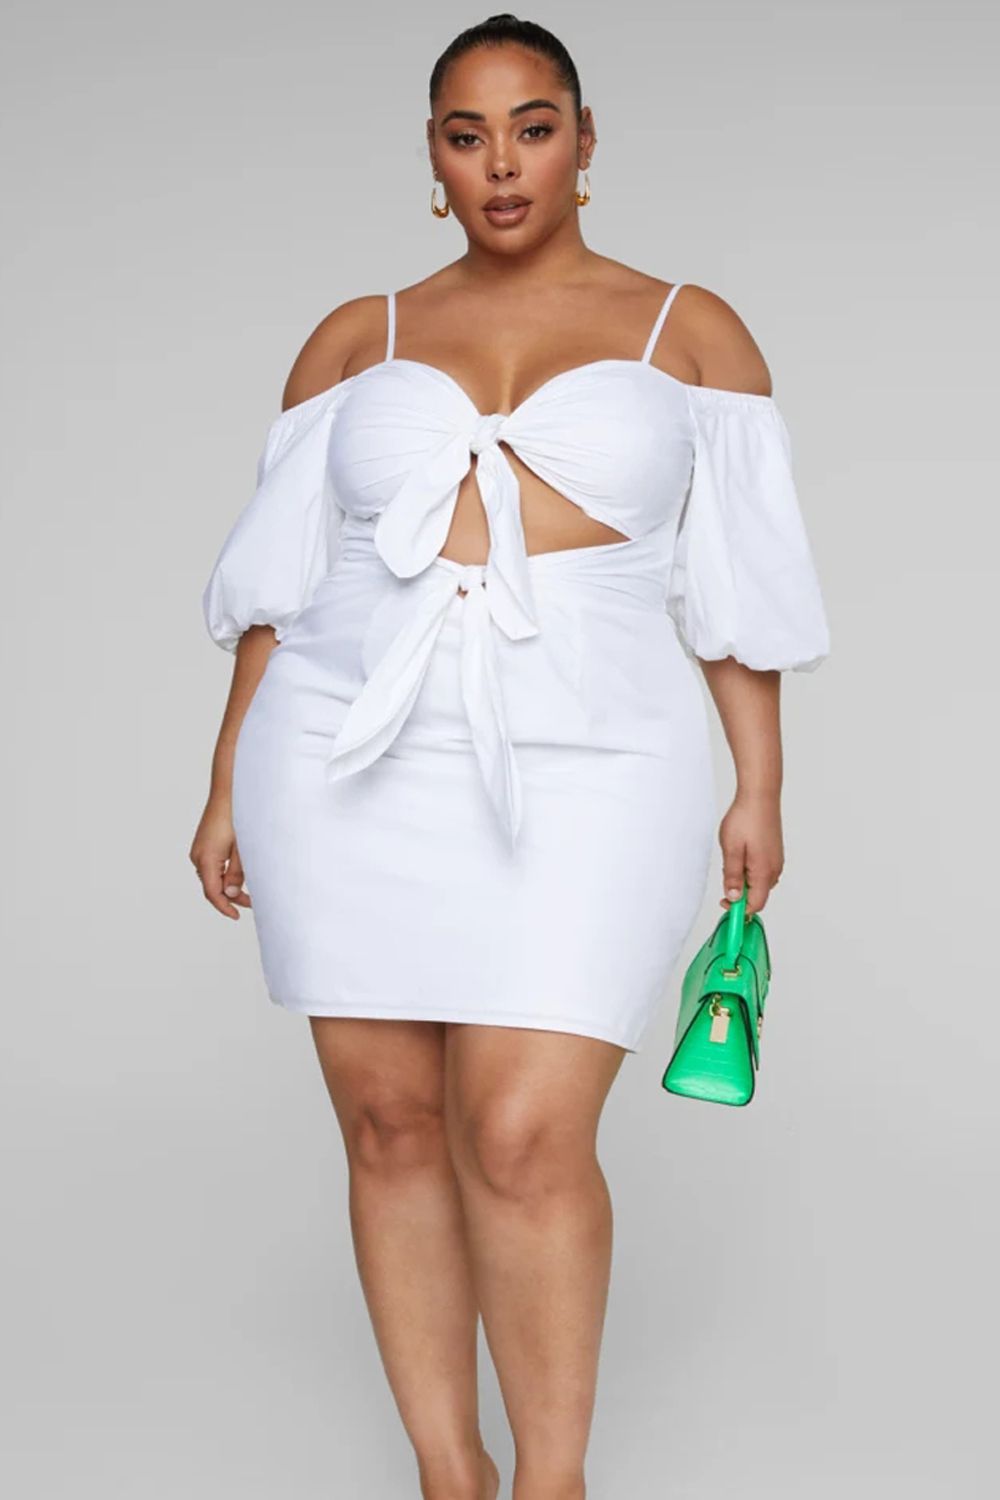 Size: 2XL White Double Tie Front Dress Product Code: F18919